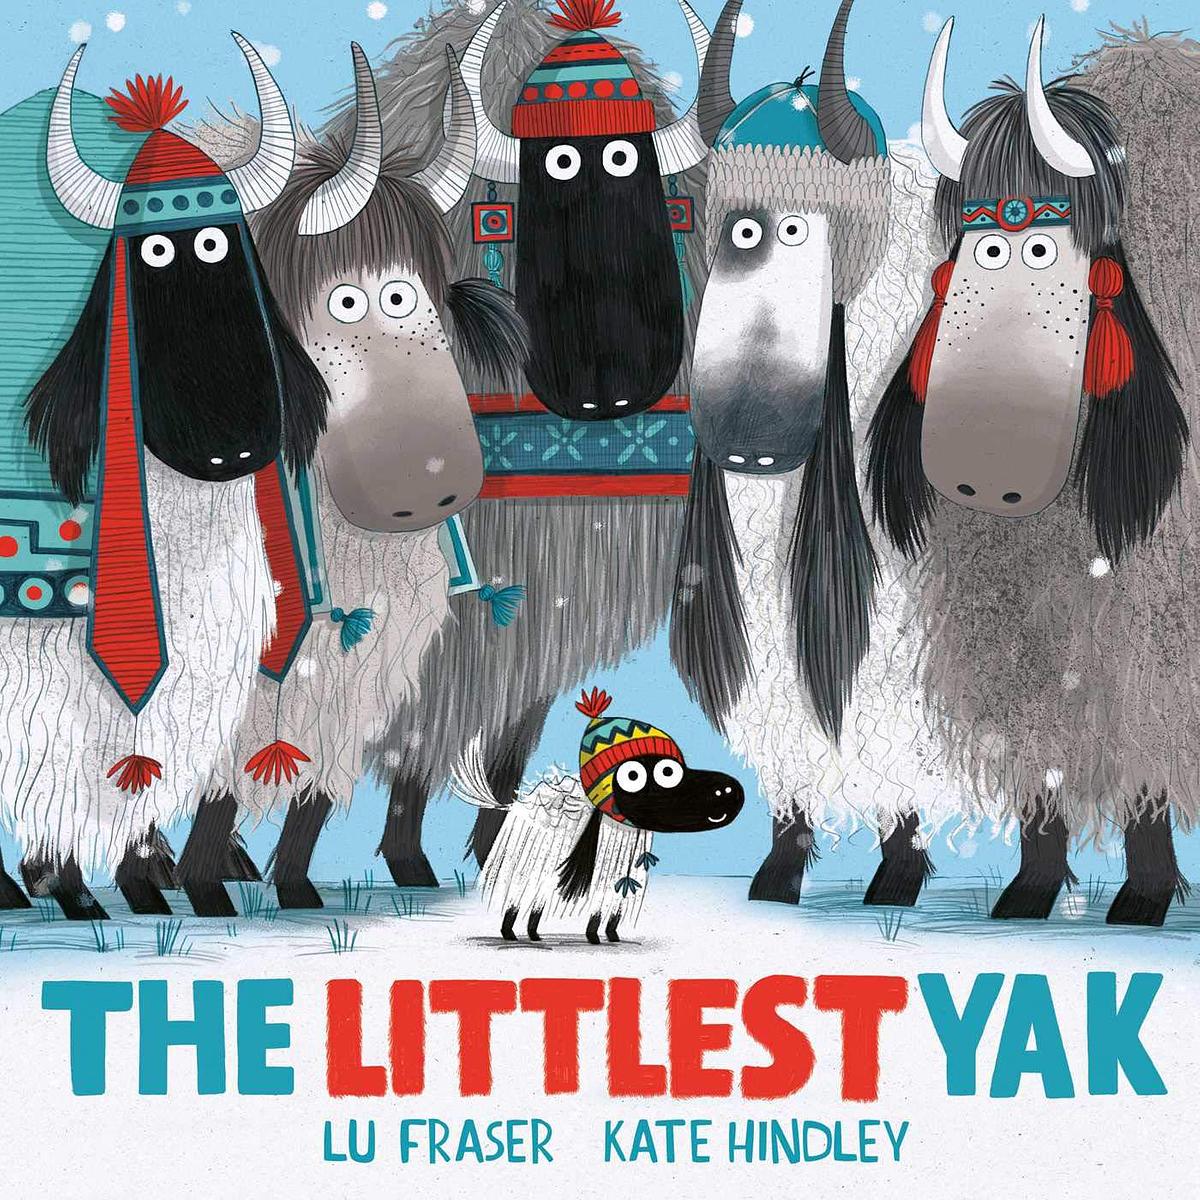 Front cover of "The Littlest Yak" by Lu Fraser and Kate Hindley